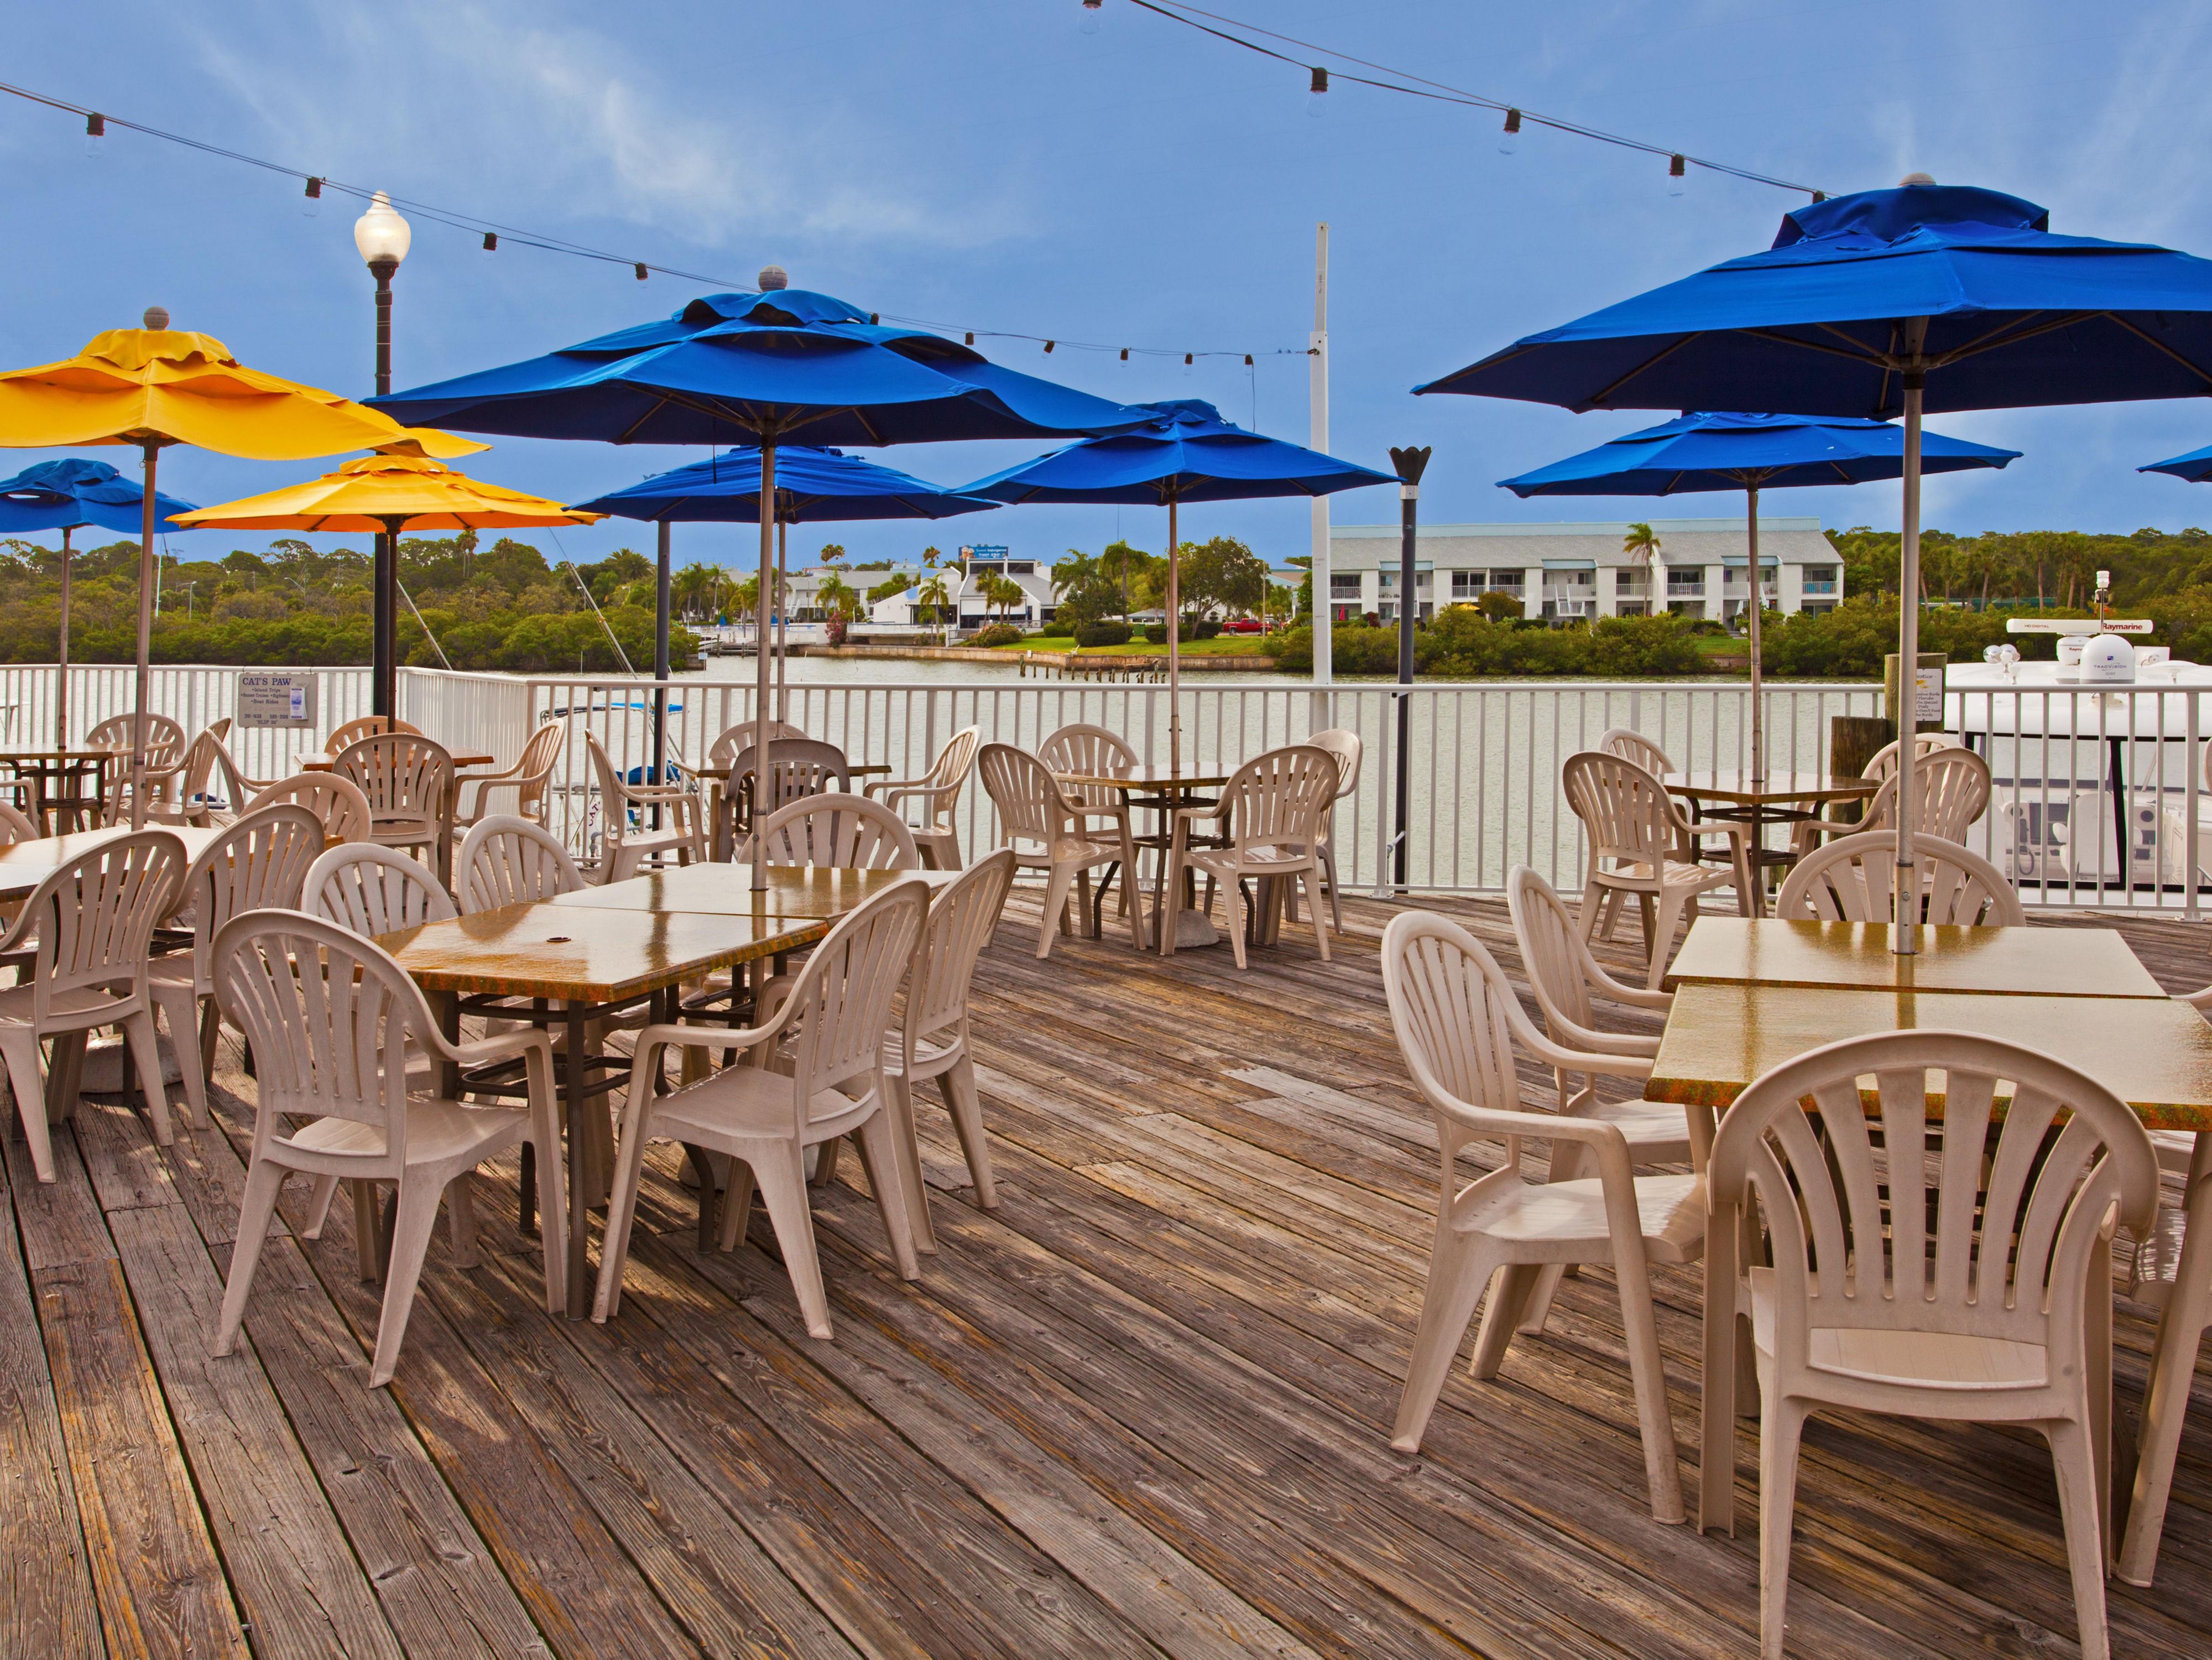 Our full-service restaurant, Jimmy Guana's, offers fresh seafood, steaks, and inspiring Chef Creations. Kids eat for free when you are staying at the hotel. Be sure to check out the nightly live entertainment and Intracoastal views from our waterfront deck where dolphin sightings are always complimentary.